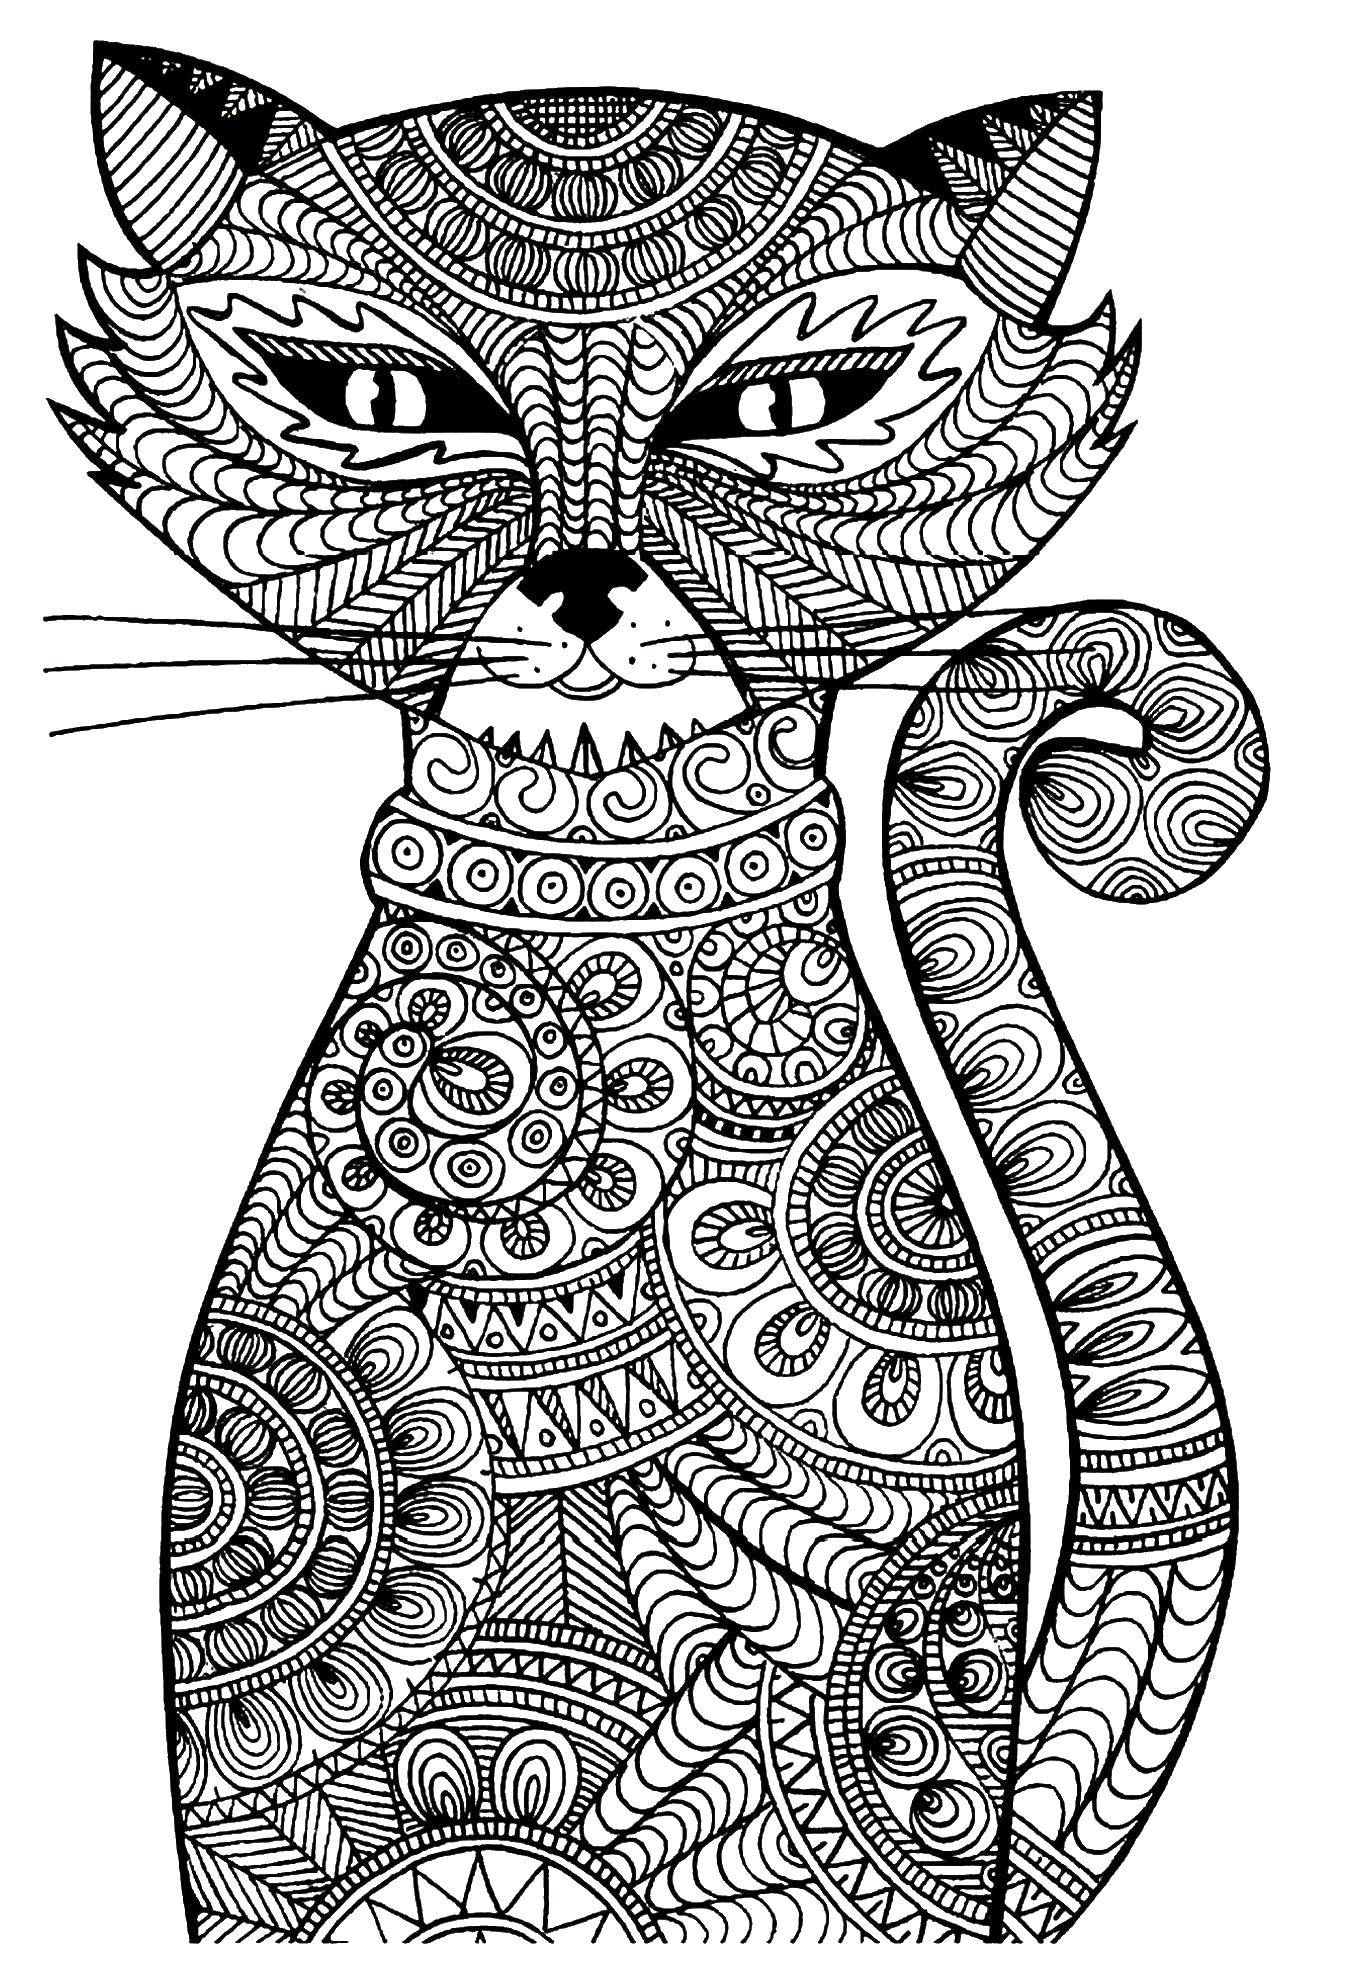 Coloring Contented cat in the patterns. Category patterns. Tags:  Patterns, animals.